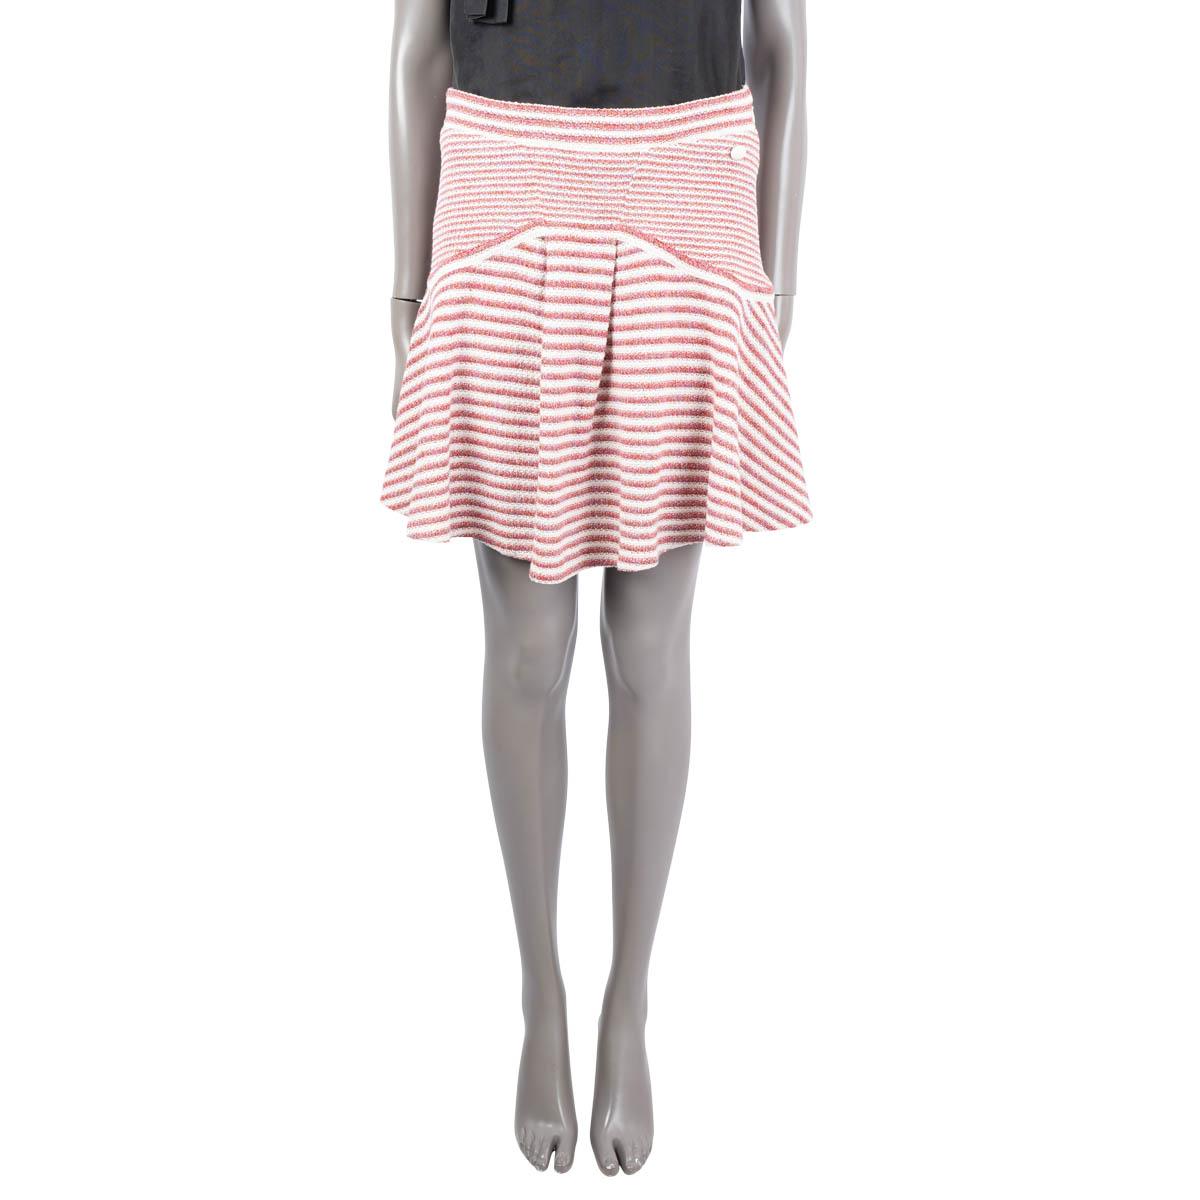 100% authentic Chanel flared knit skirt in red and off-white striped paper (41%), cotton (31%) and silk (28%). Features a glossy button on the waist. Opens with a concealed zipper on the side and is lined in silk (with 14% spandex). Has been worn